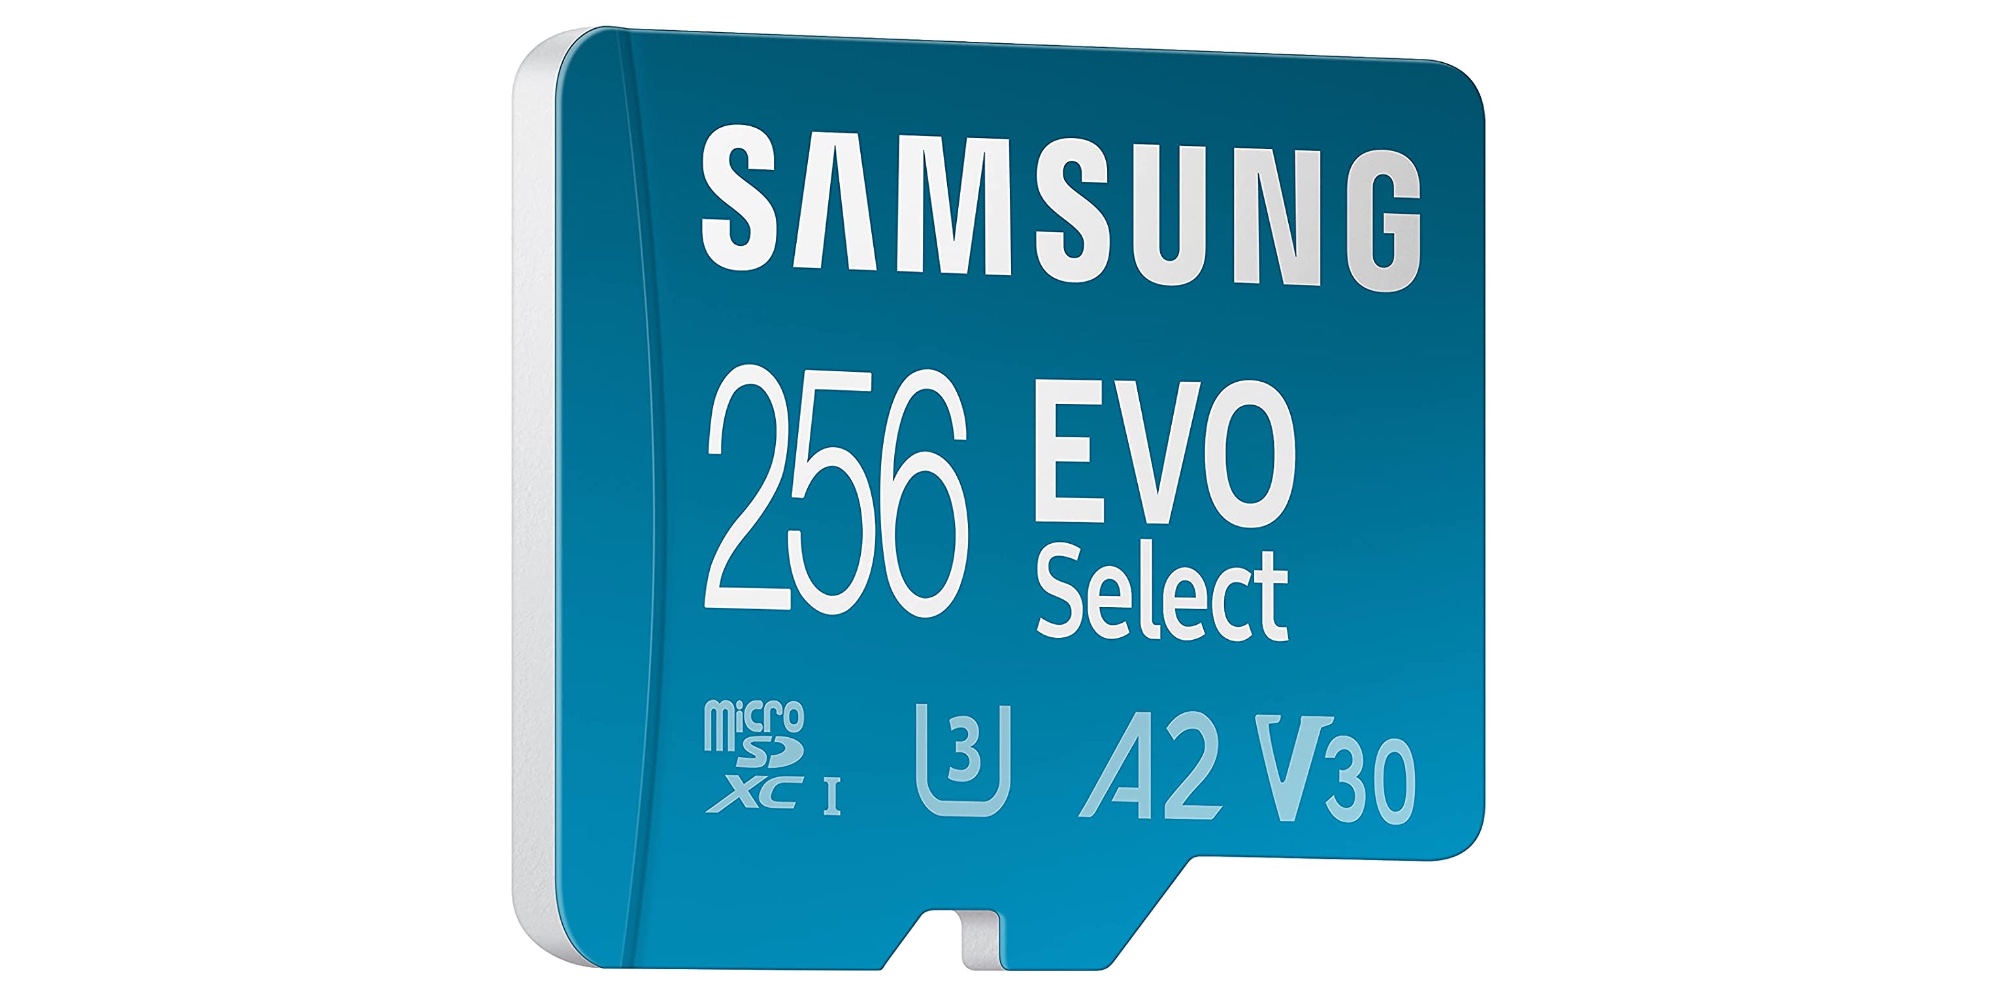 Equivalent Fifty Productive Samsung's just-released EVO Select microSD cards now on sale from $19 (New  lows)